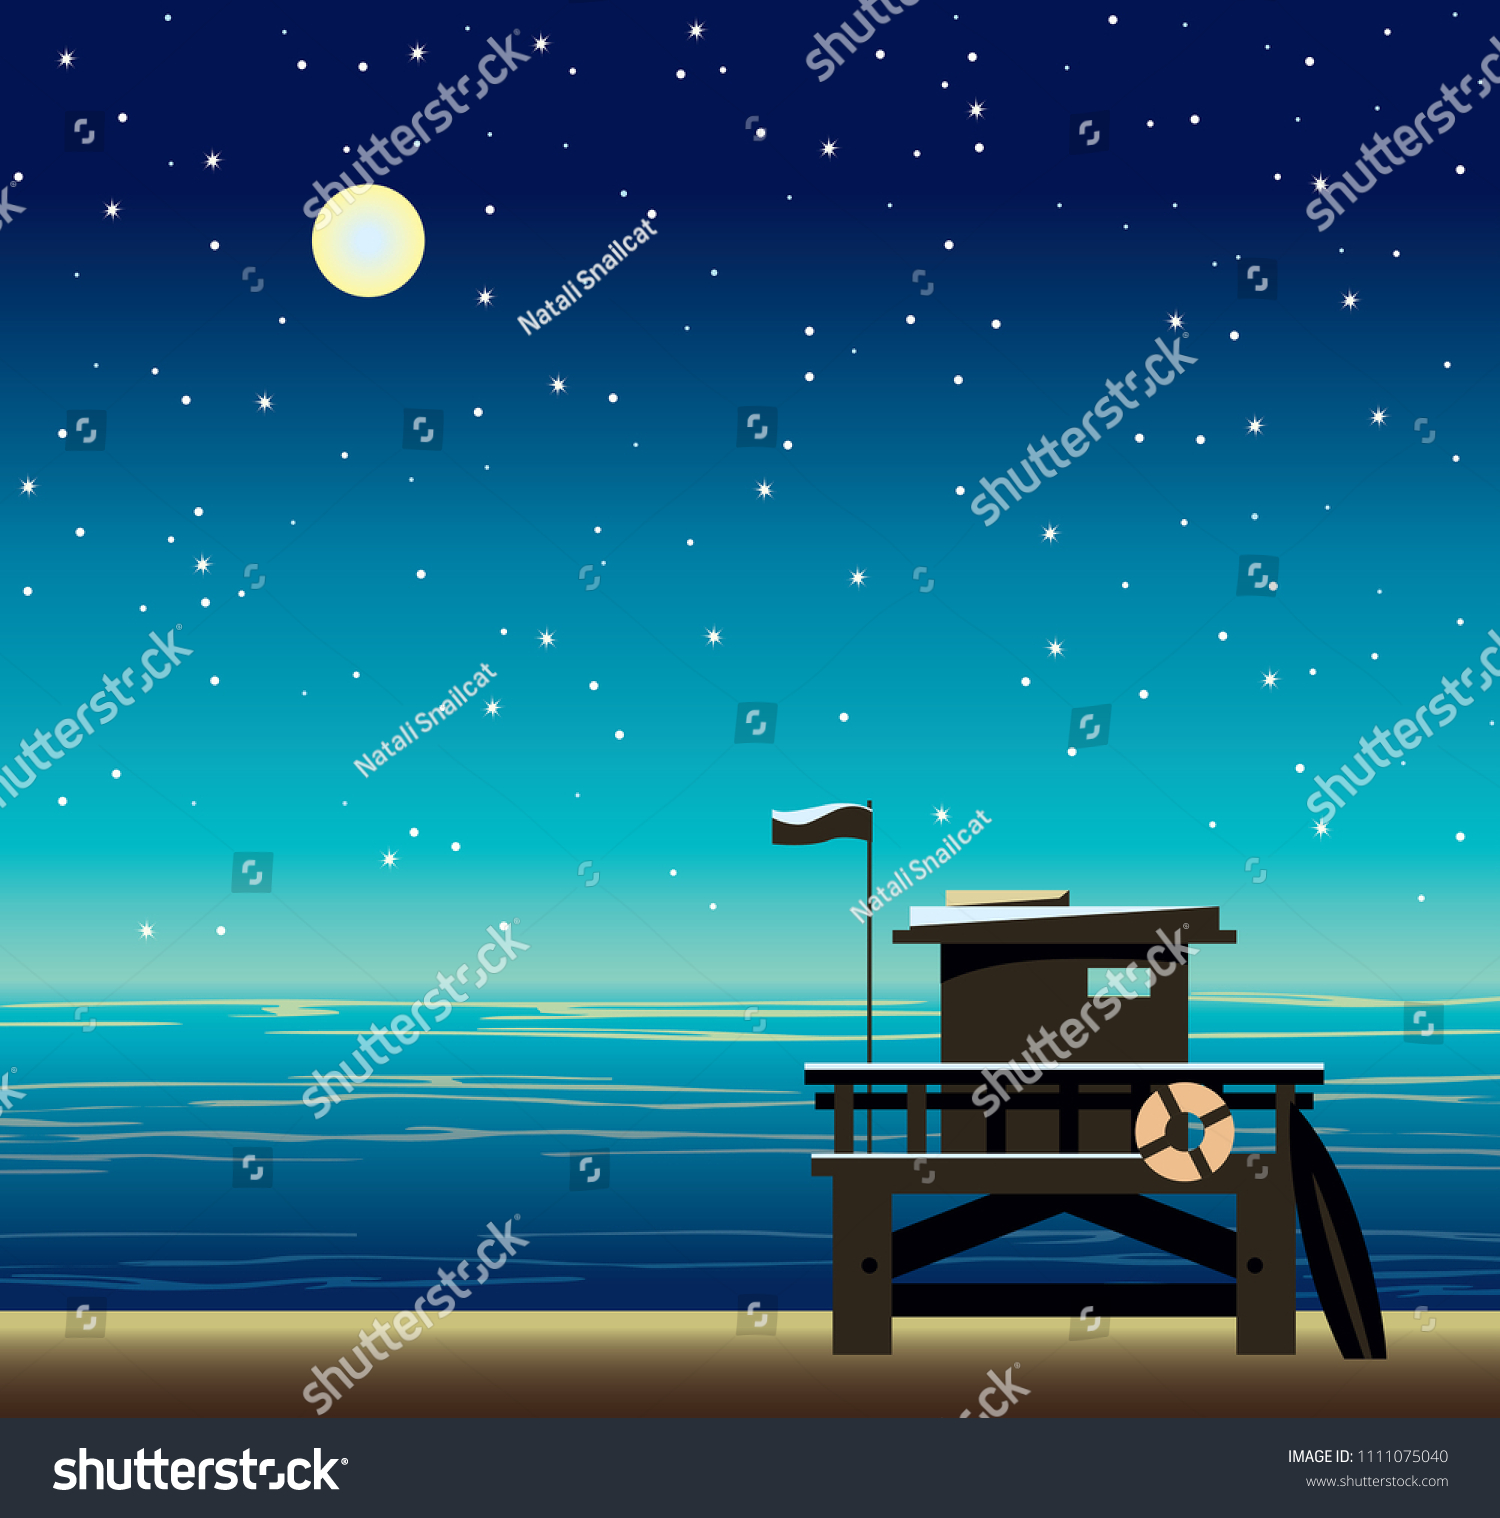 SVG of Lifeguard station on a beach with with blue sea on a night starry sky. Vector illustration with summer landscape. svg